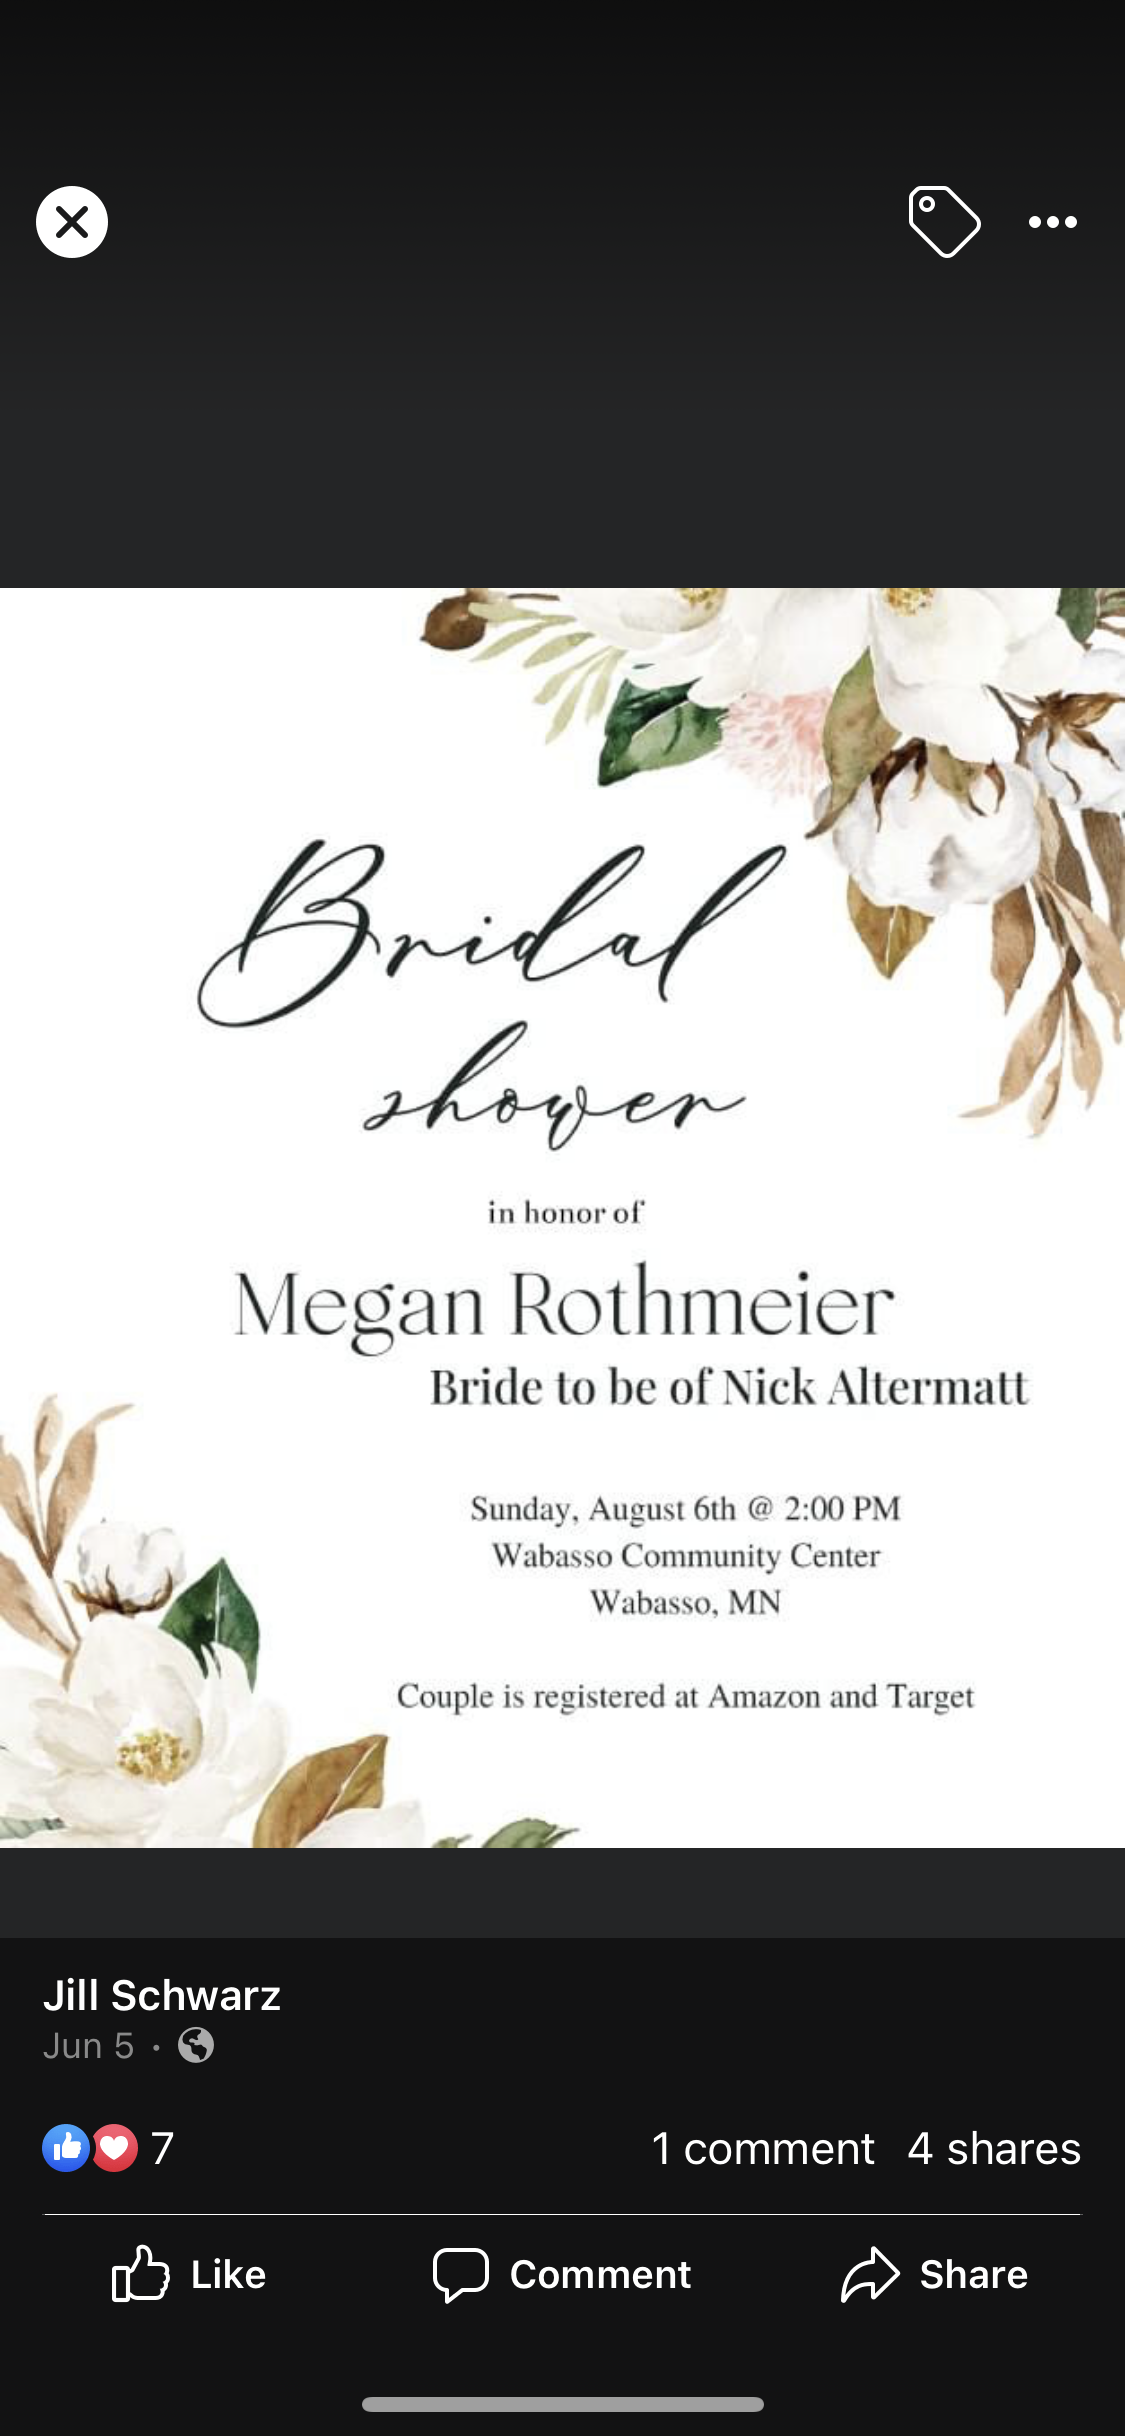 <h1 class="tribe-events-single-event-title">Bridal Shower for Megan Rothmeier</h1>